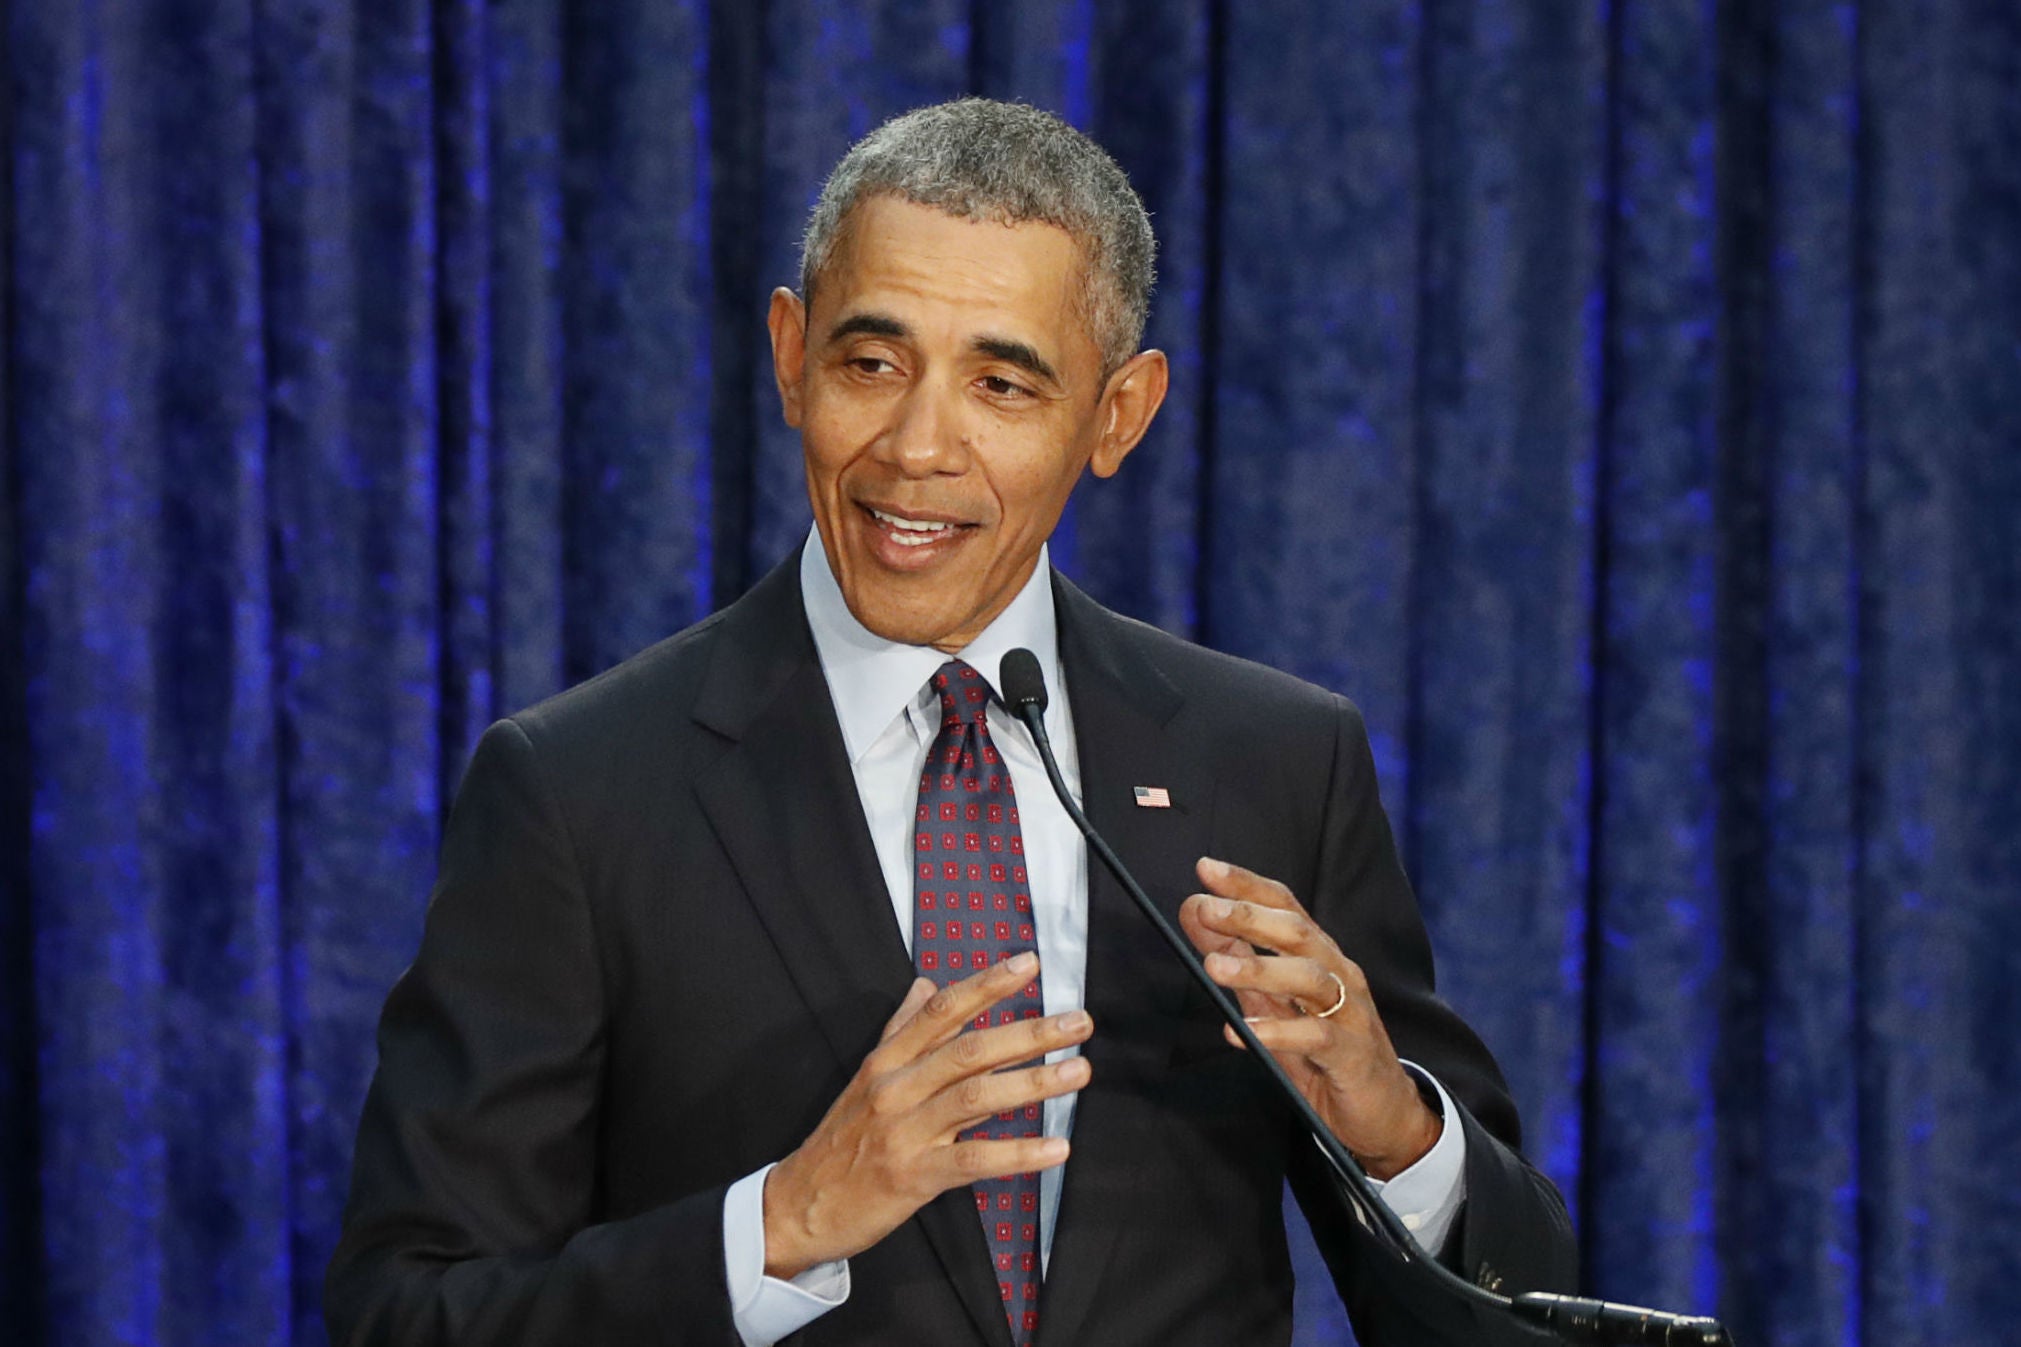 Barack Obama spoke to fundraisers, stressing the importance of voting